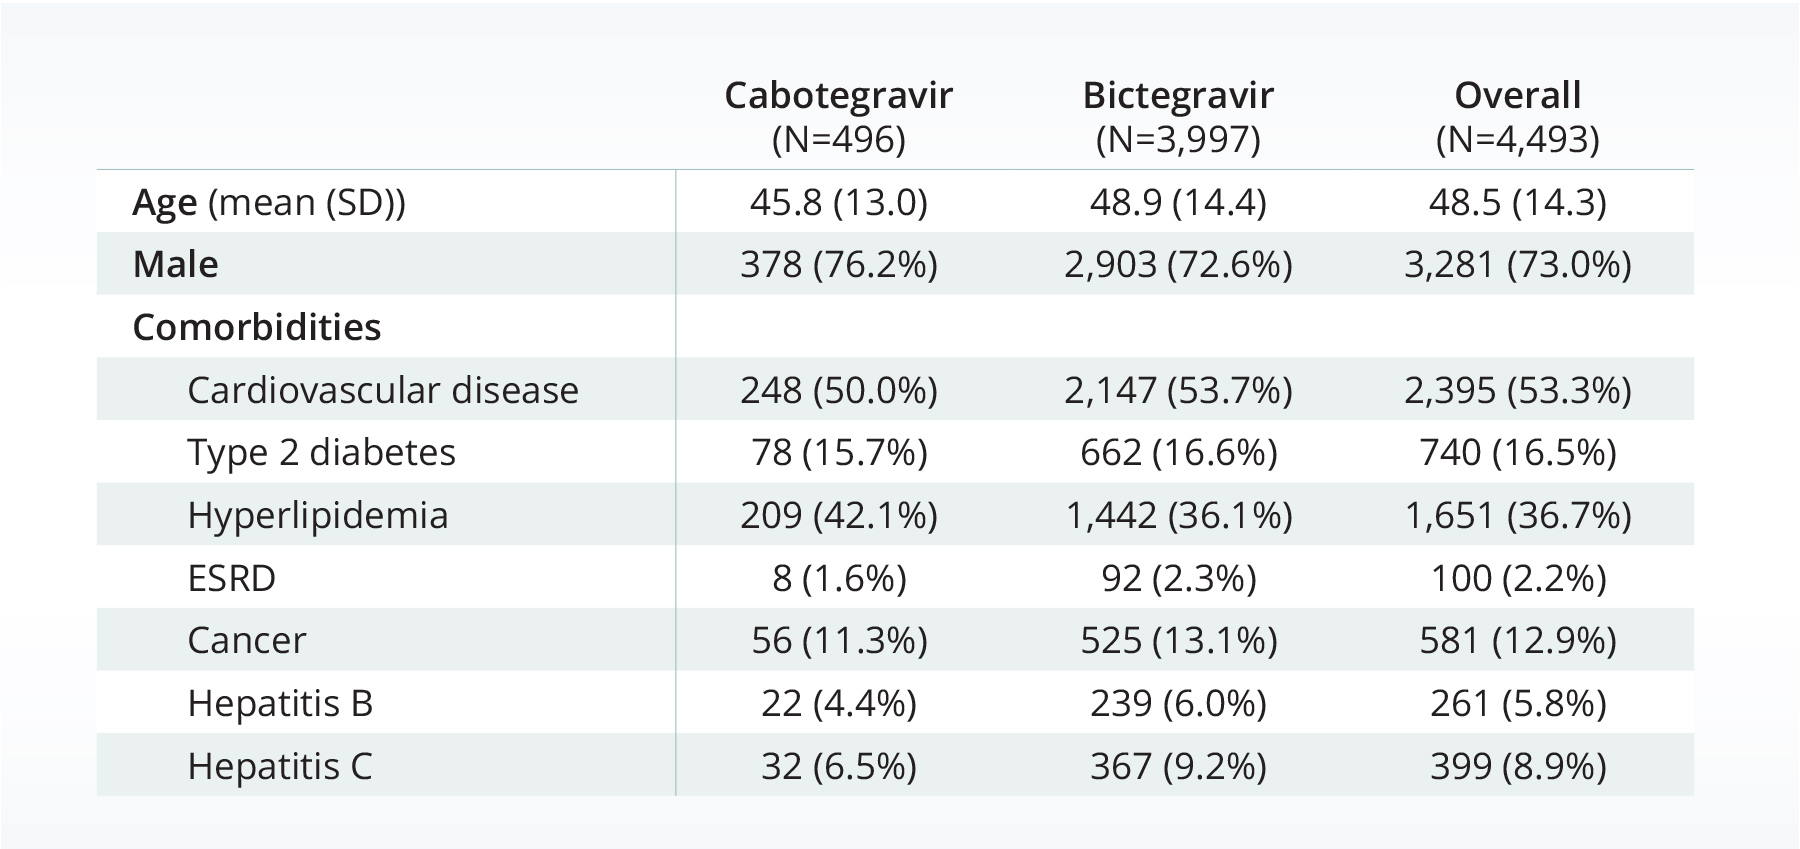 Comorbidities for HIV patients taking cabotegravir or bictegravir